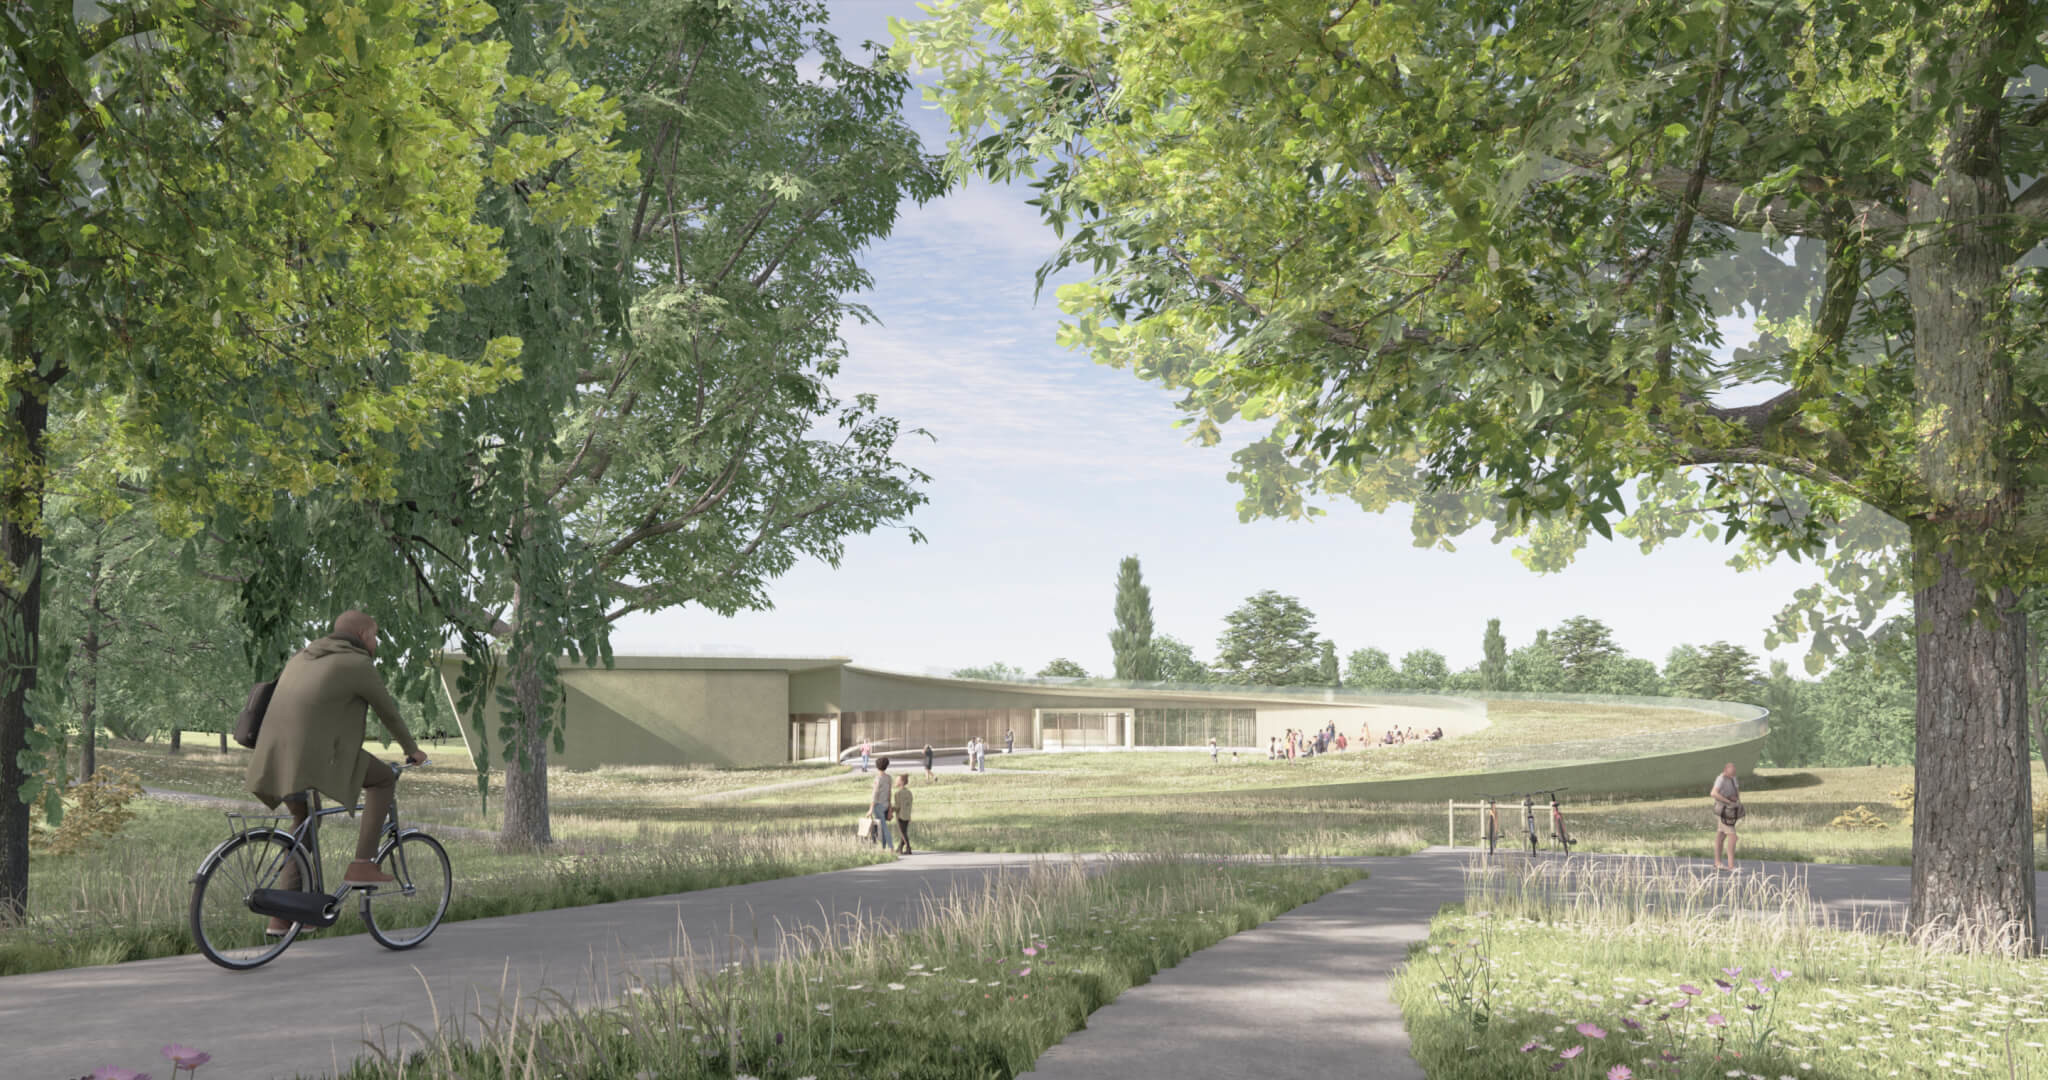 Maya Lin designs the new performing arts studio building for Bard College